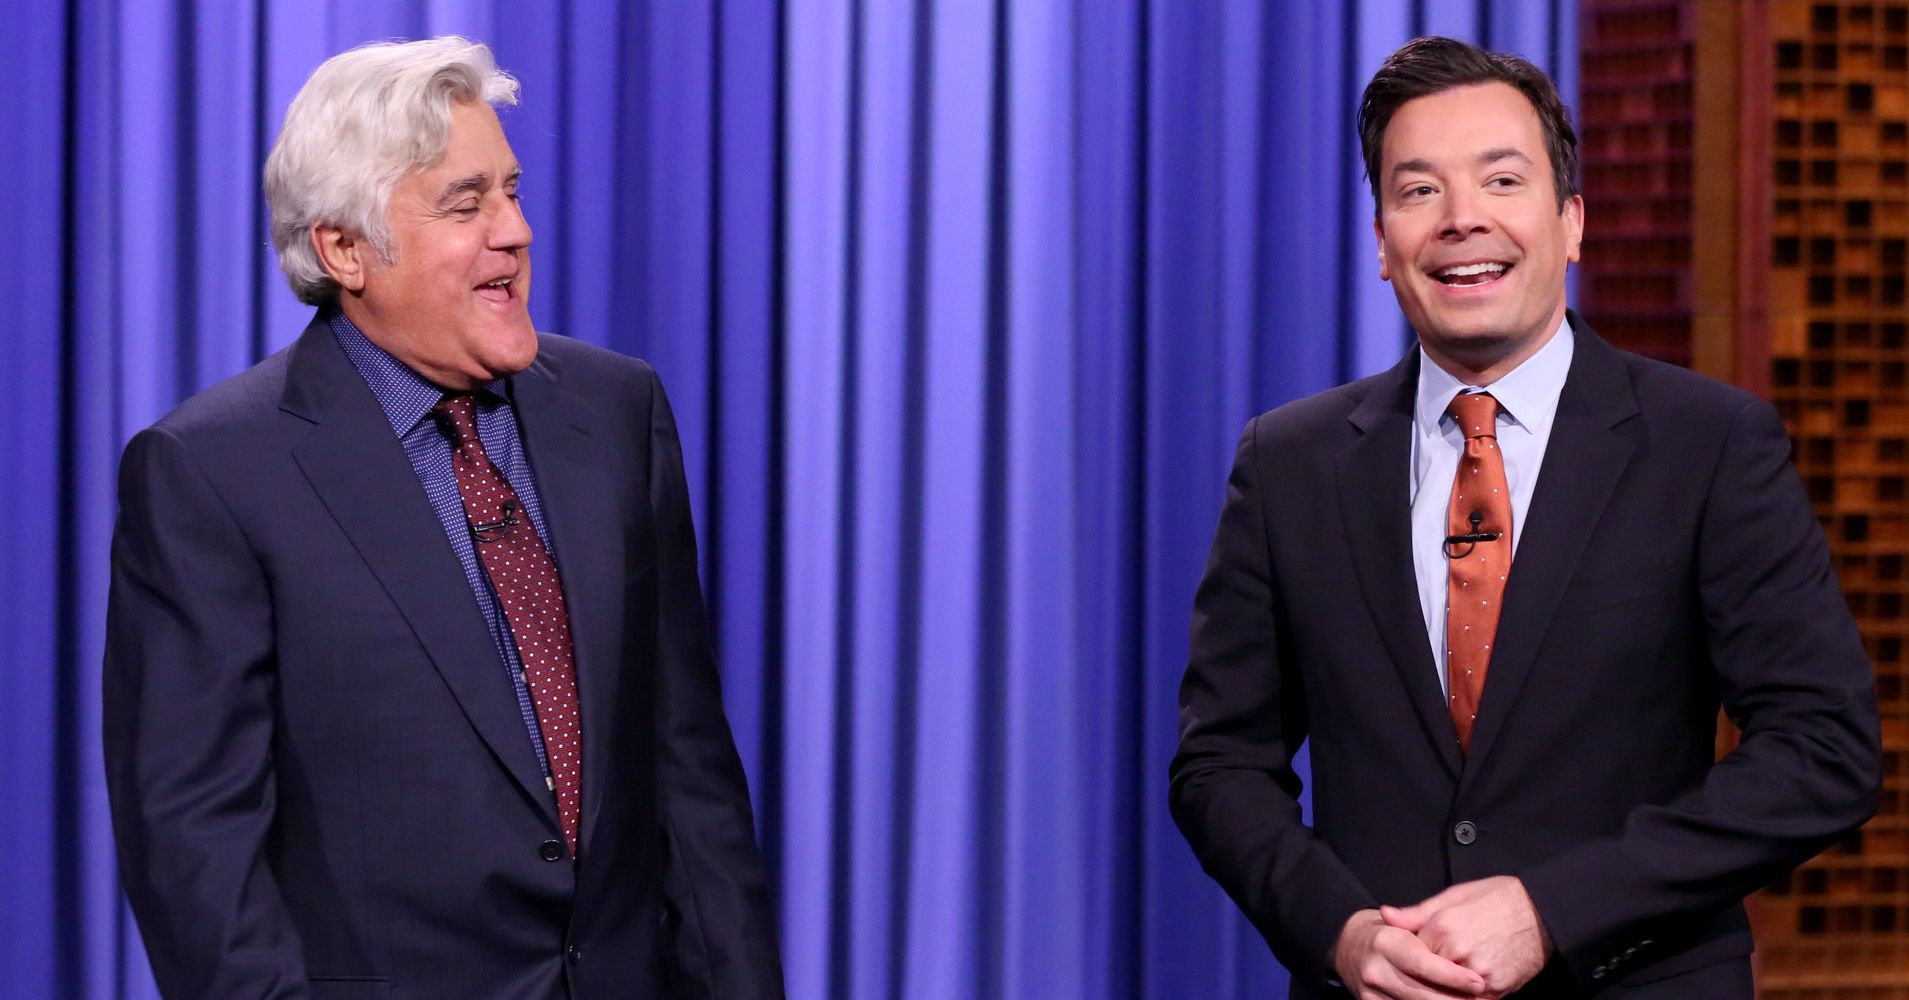 Jay Leno Knows Why Jimmy Fallon Is Back On Top | HuffPost - HuffPost